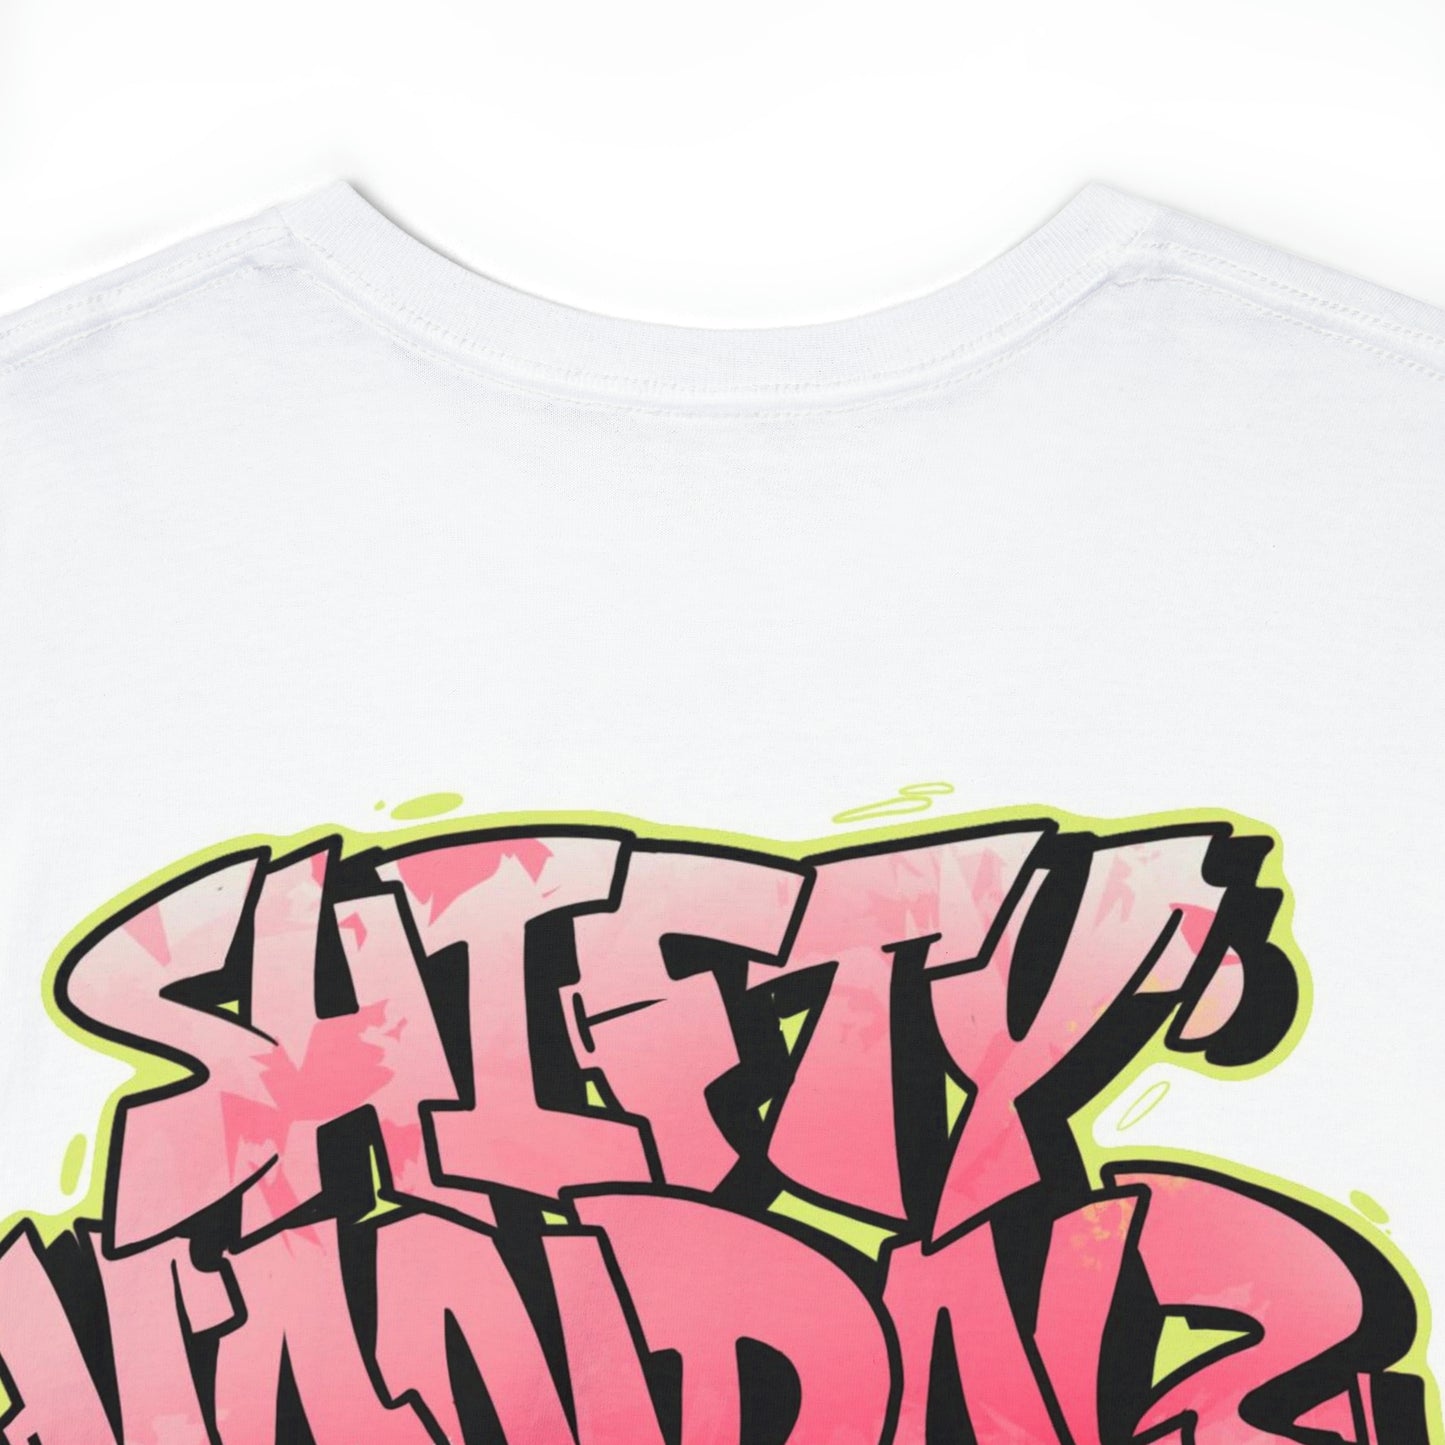 Official Shifty vandalz tee(Images switched)